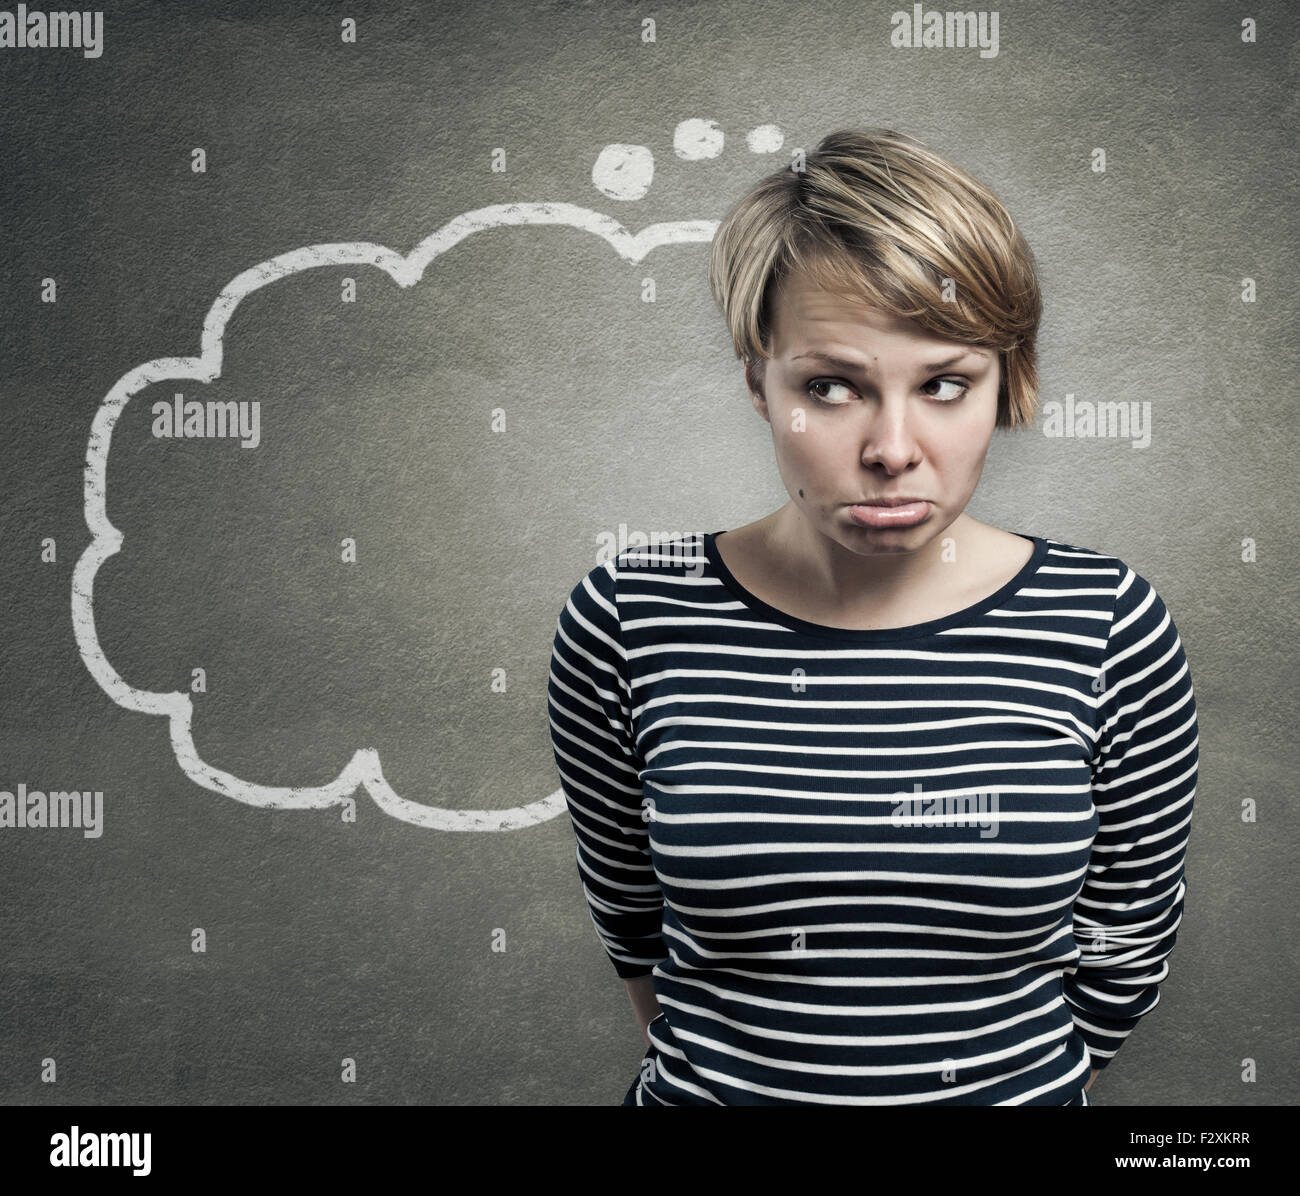 Illustration of a young woman thinking, with thought balloon Stock Photo